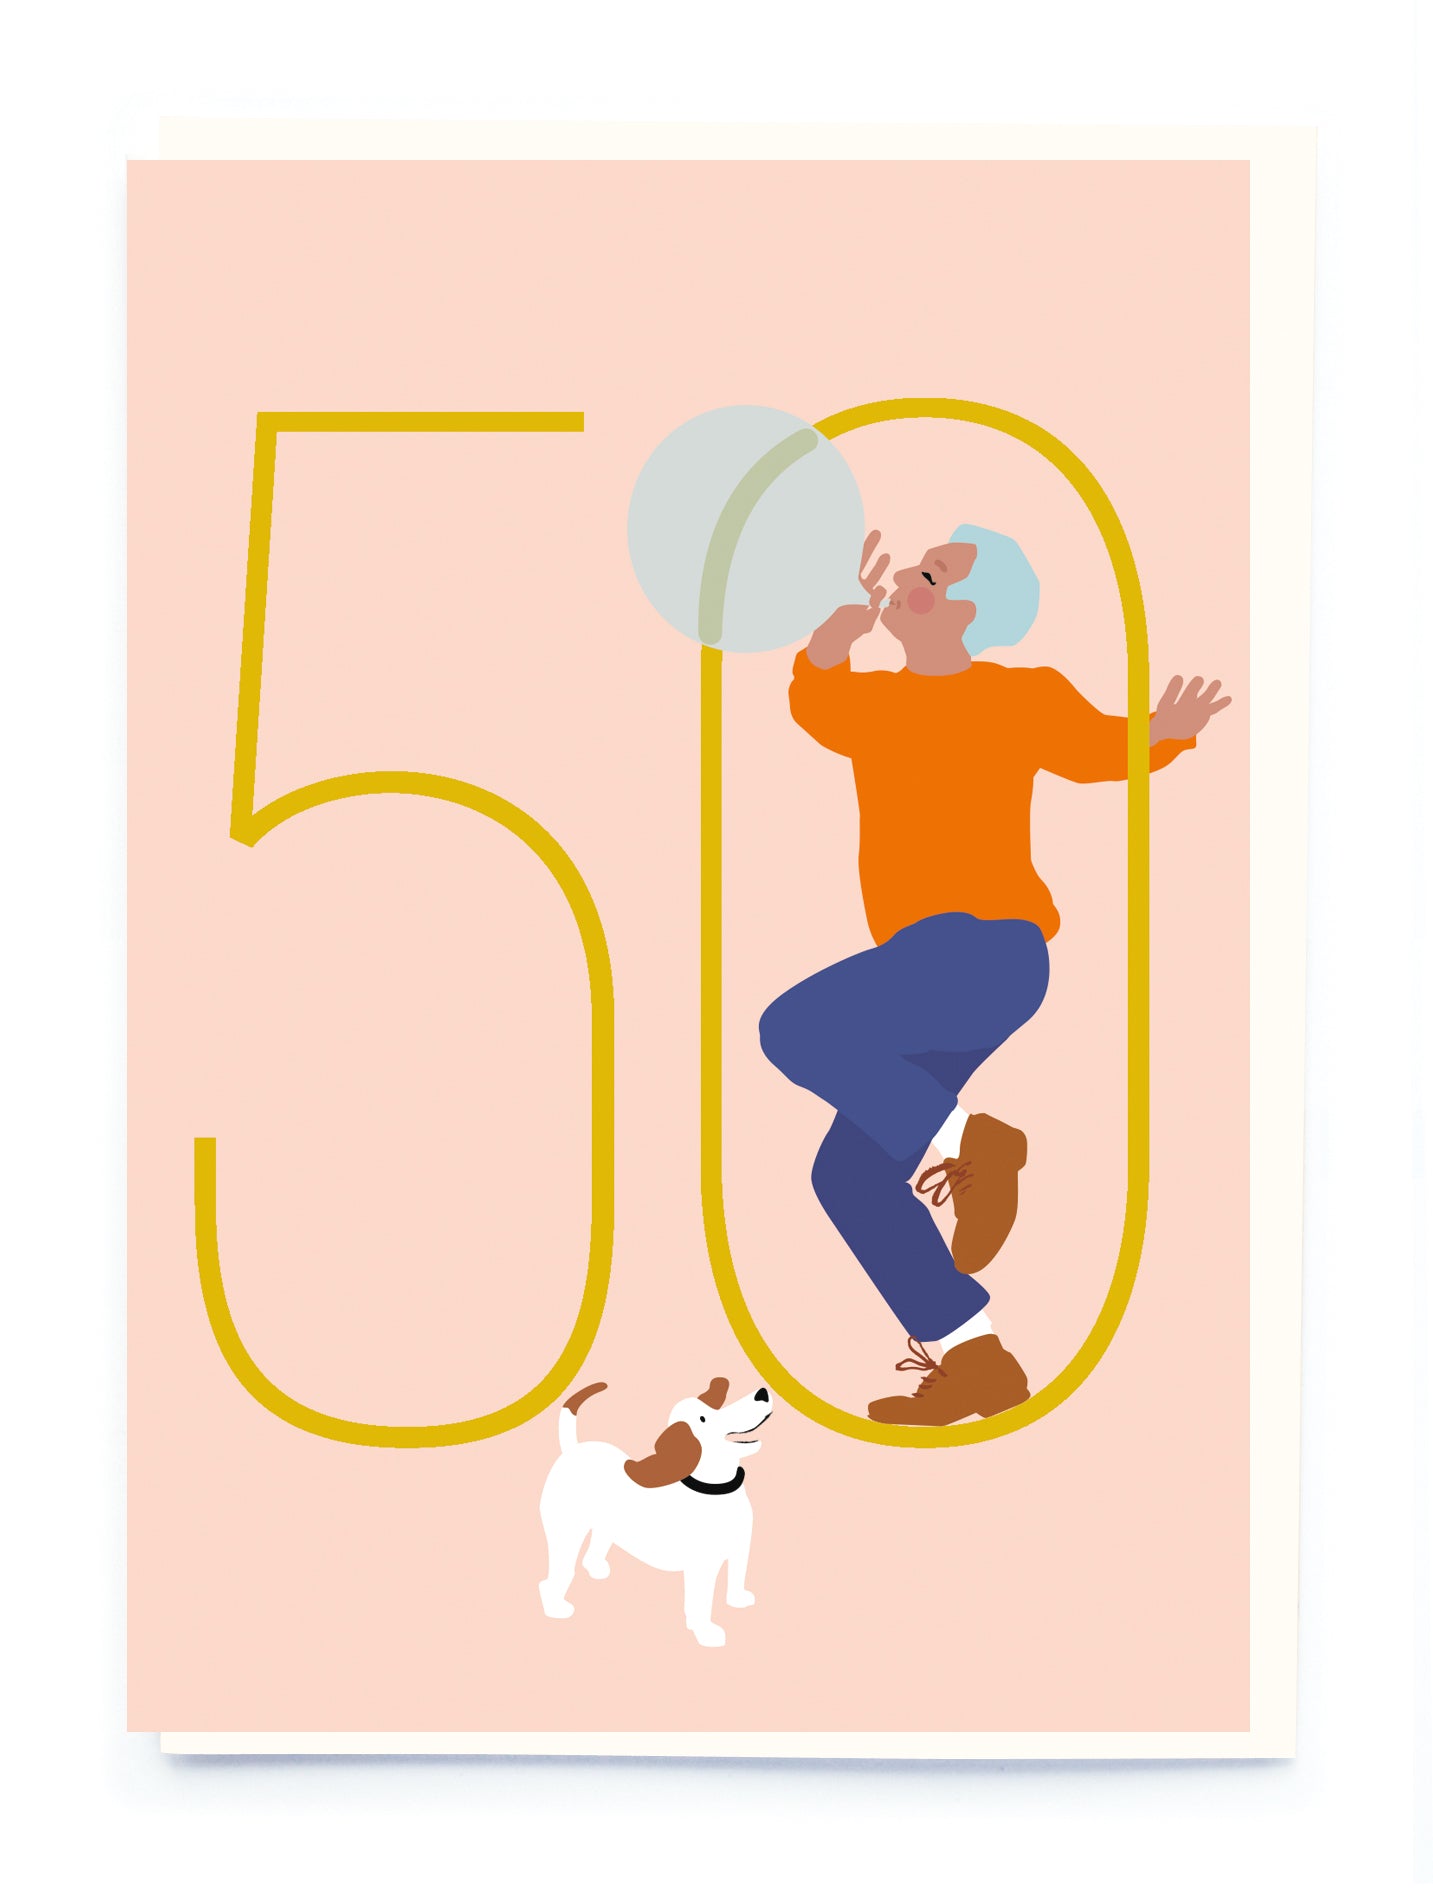 MENS AGE 50 | CARD BY NOI